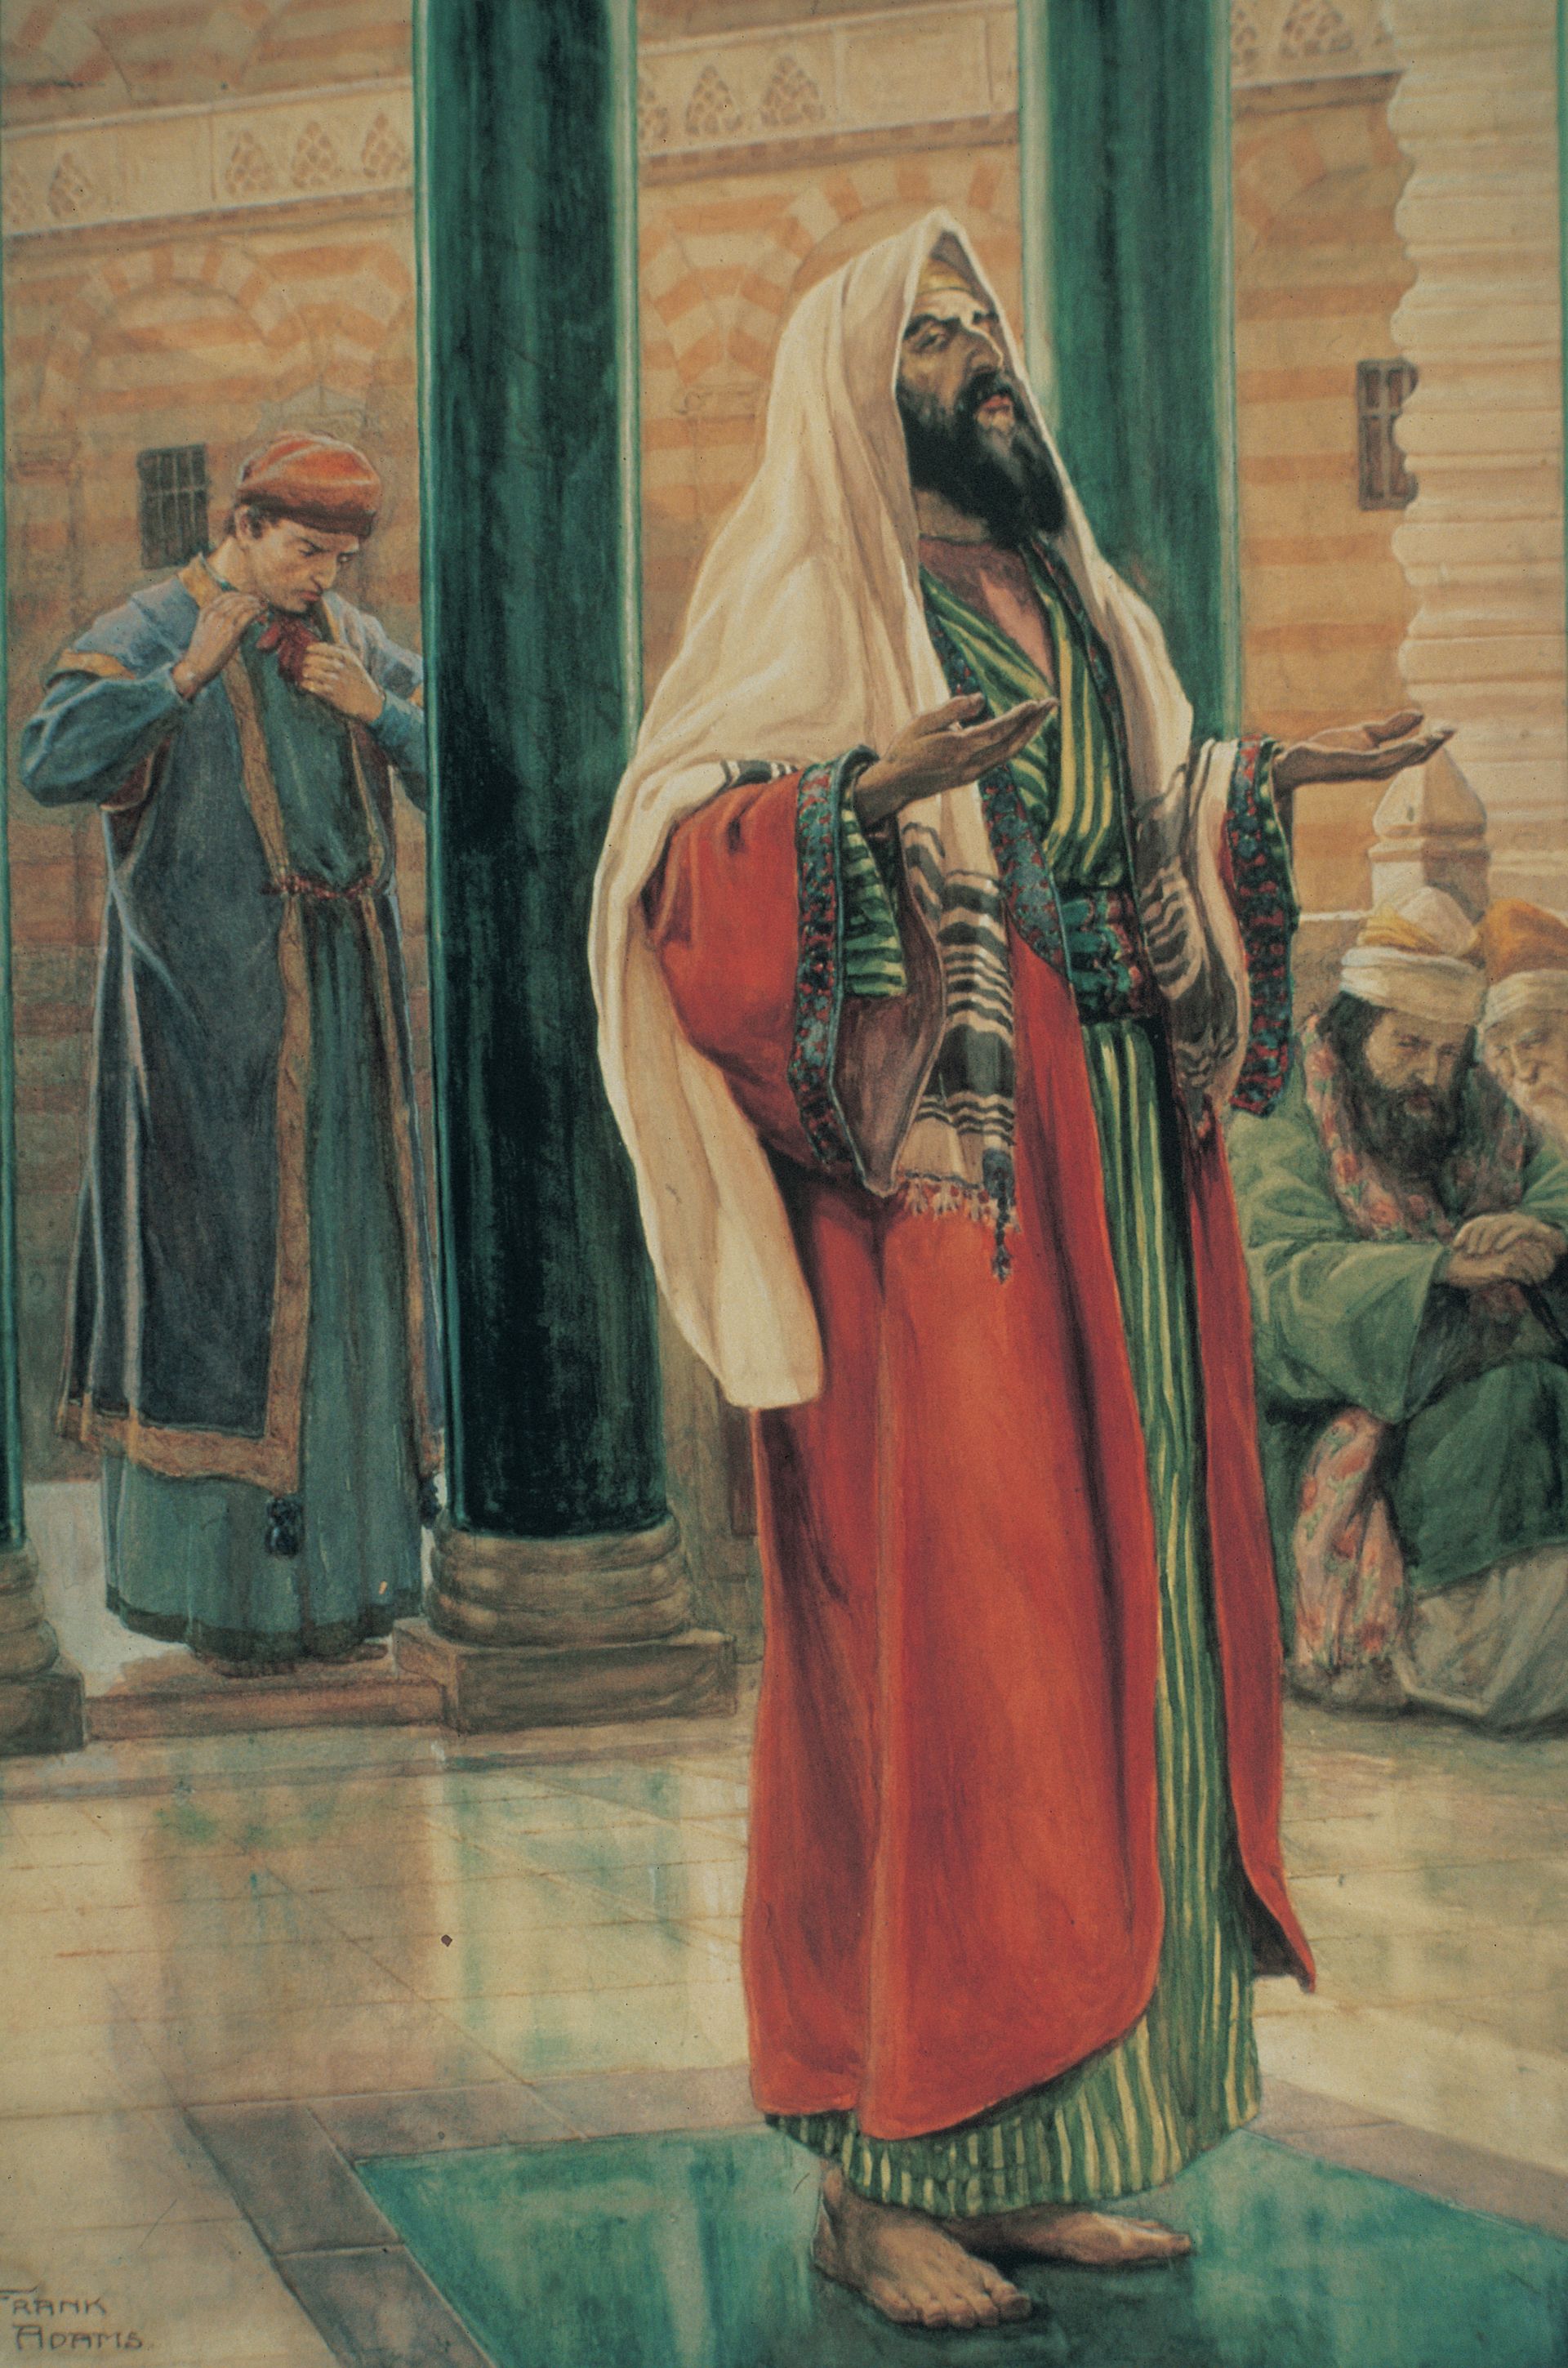 The Repentant Publican and the Self-Righteous Pharisee in the Temple, by Frank Adams.